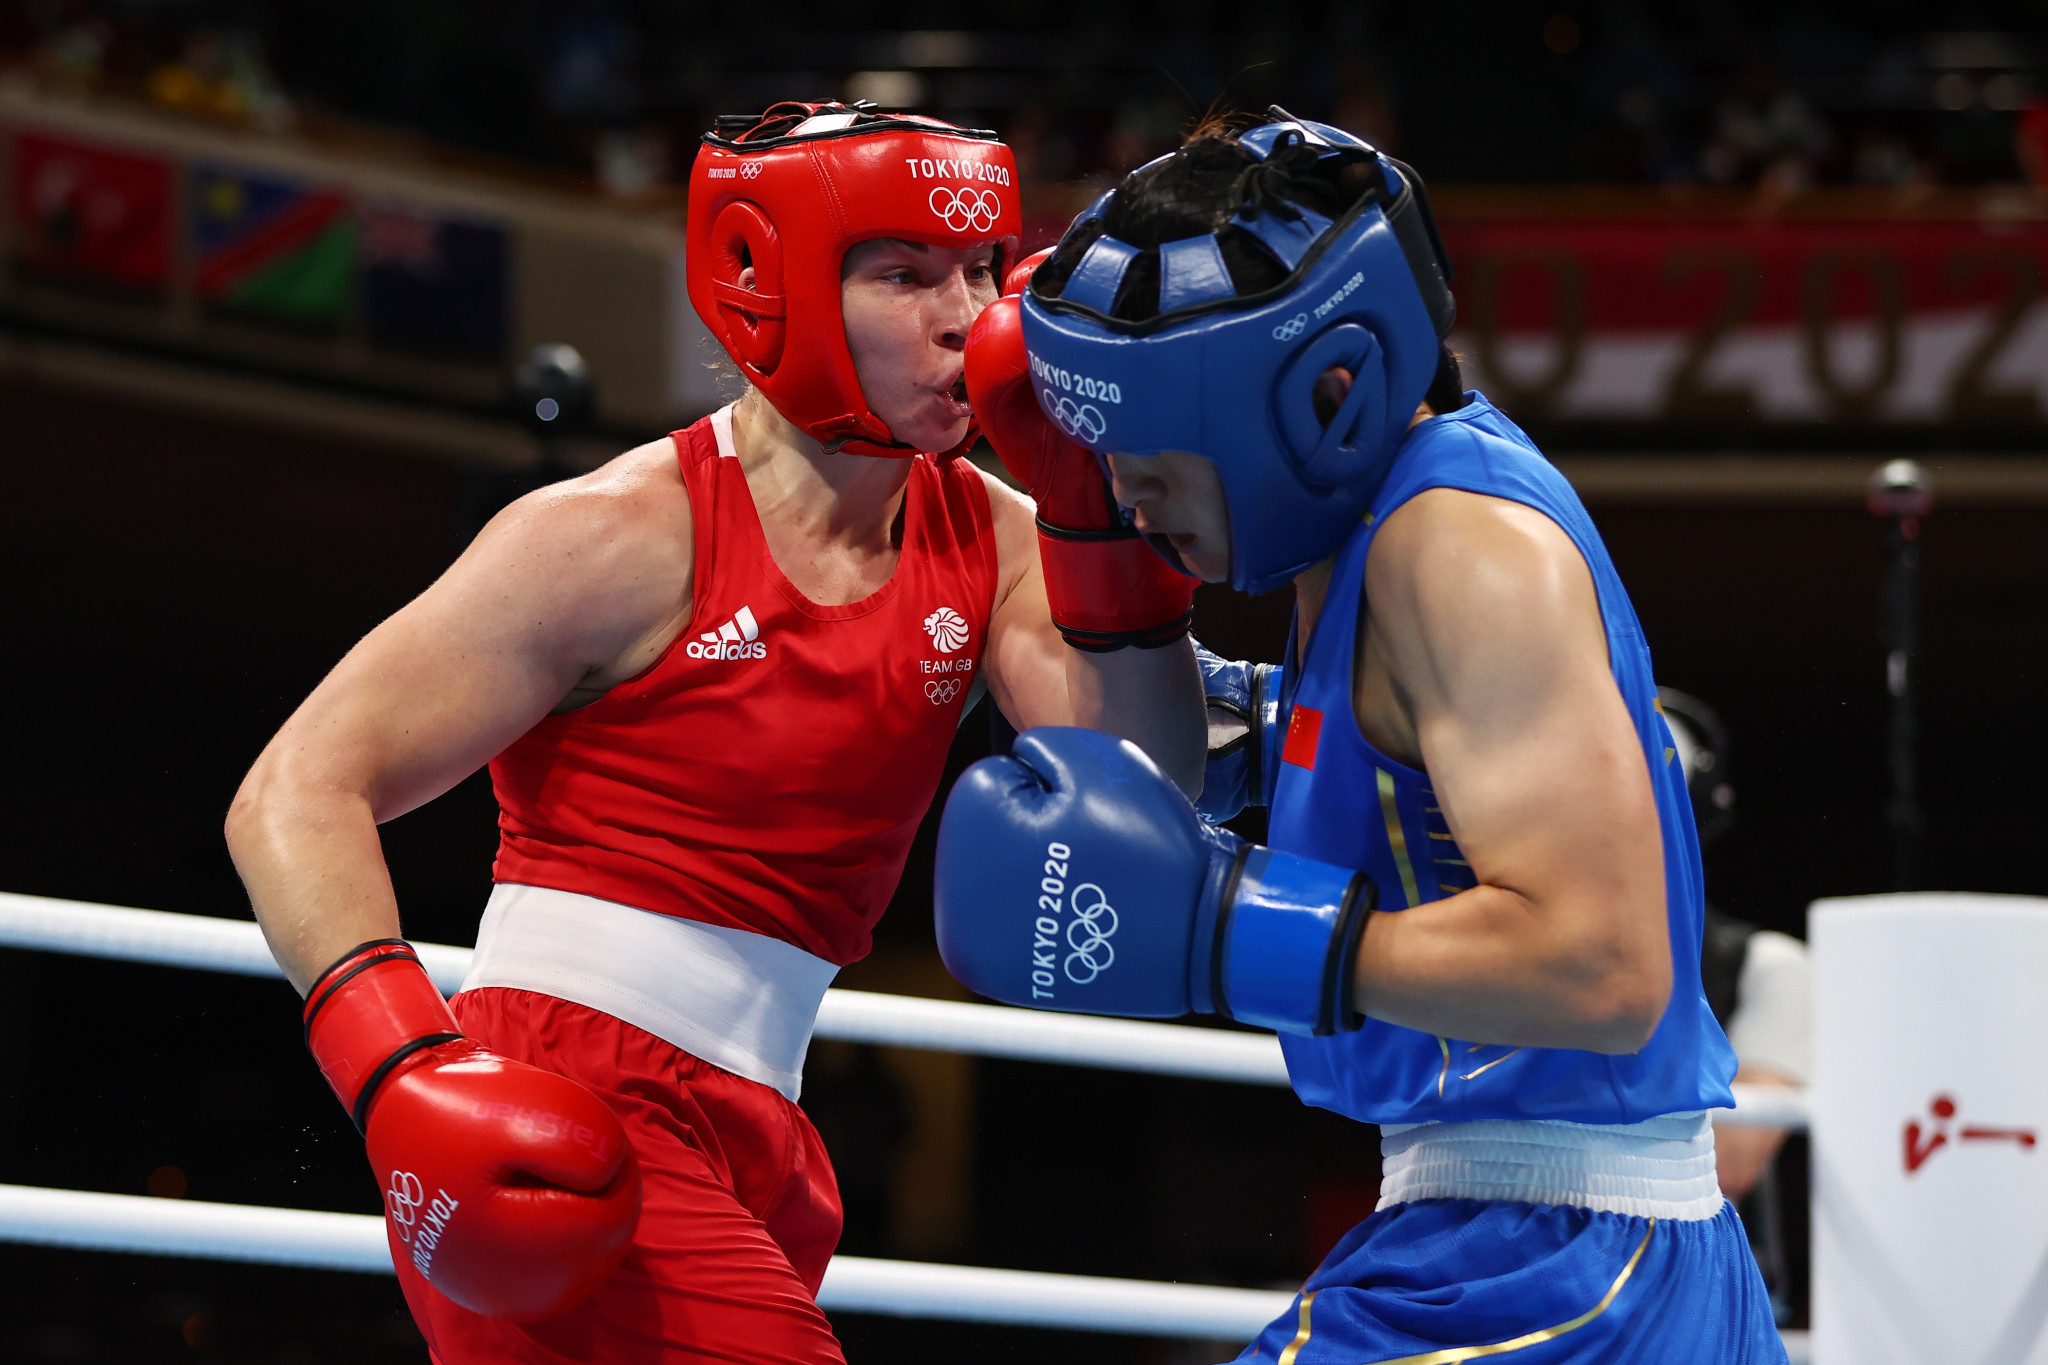 APPG for boxing chair believes Birmingham 2022 a "great opportunity" for the sport